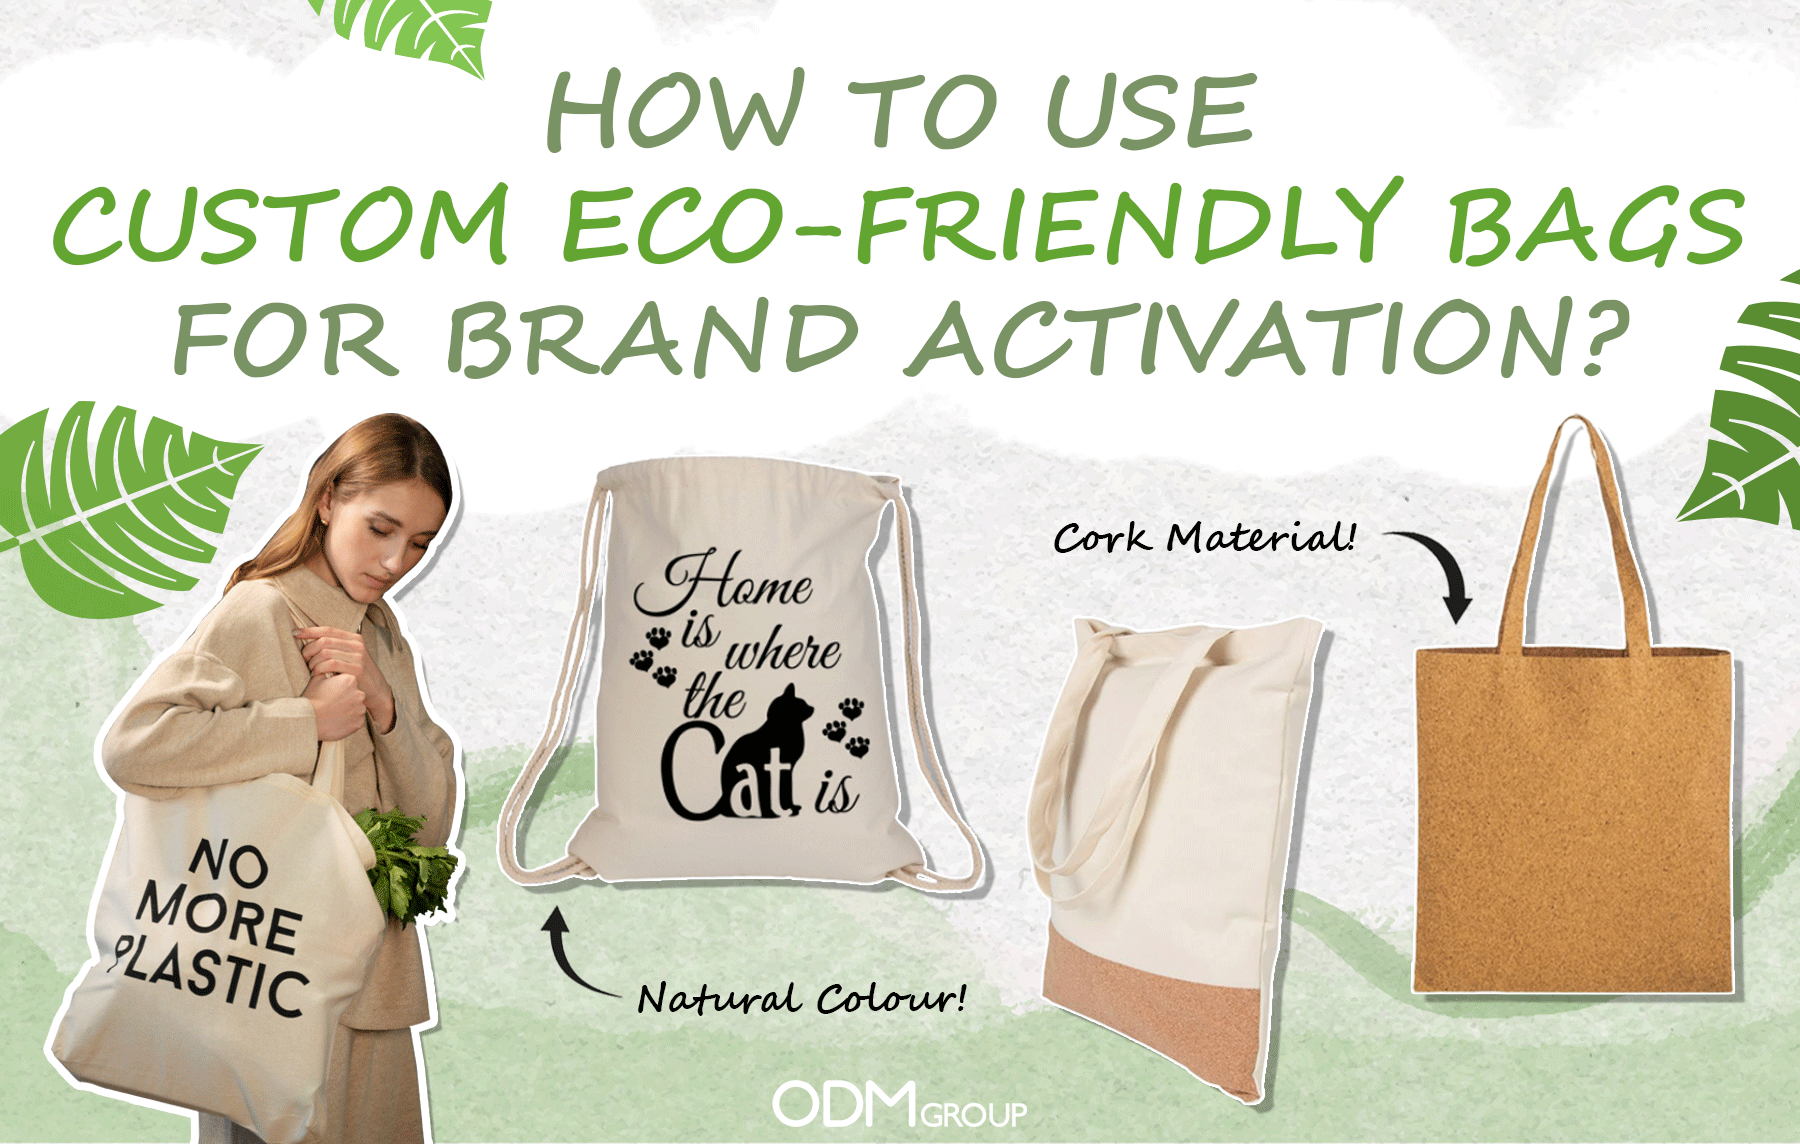 Various eco-friendly bags made from natural and cork materials.